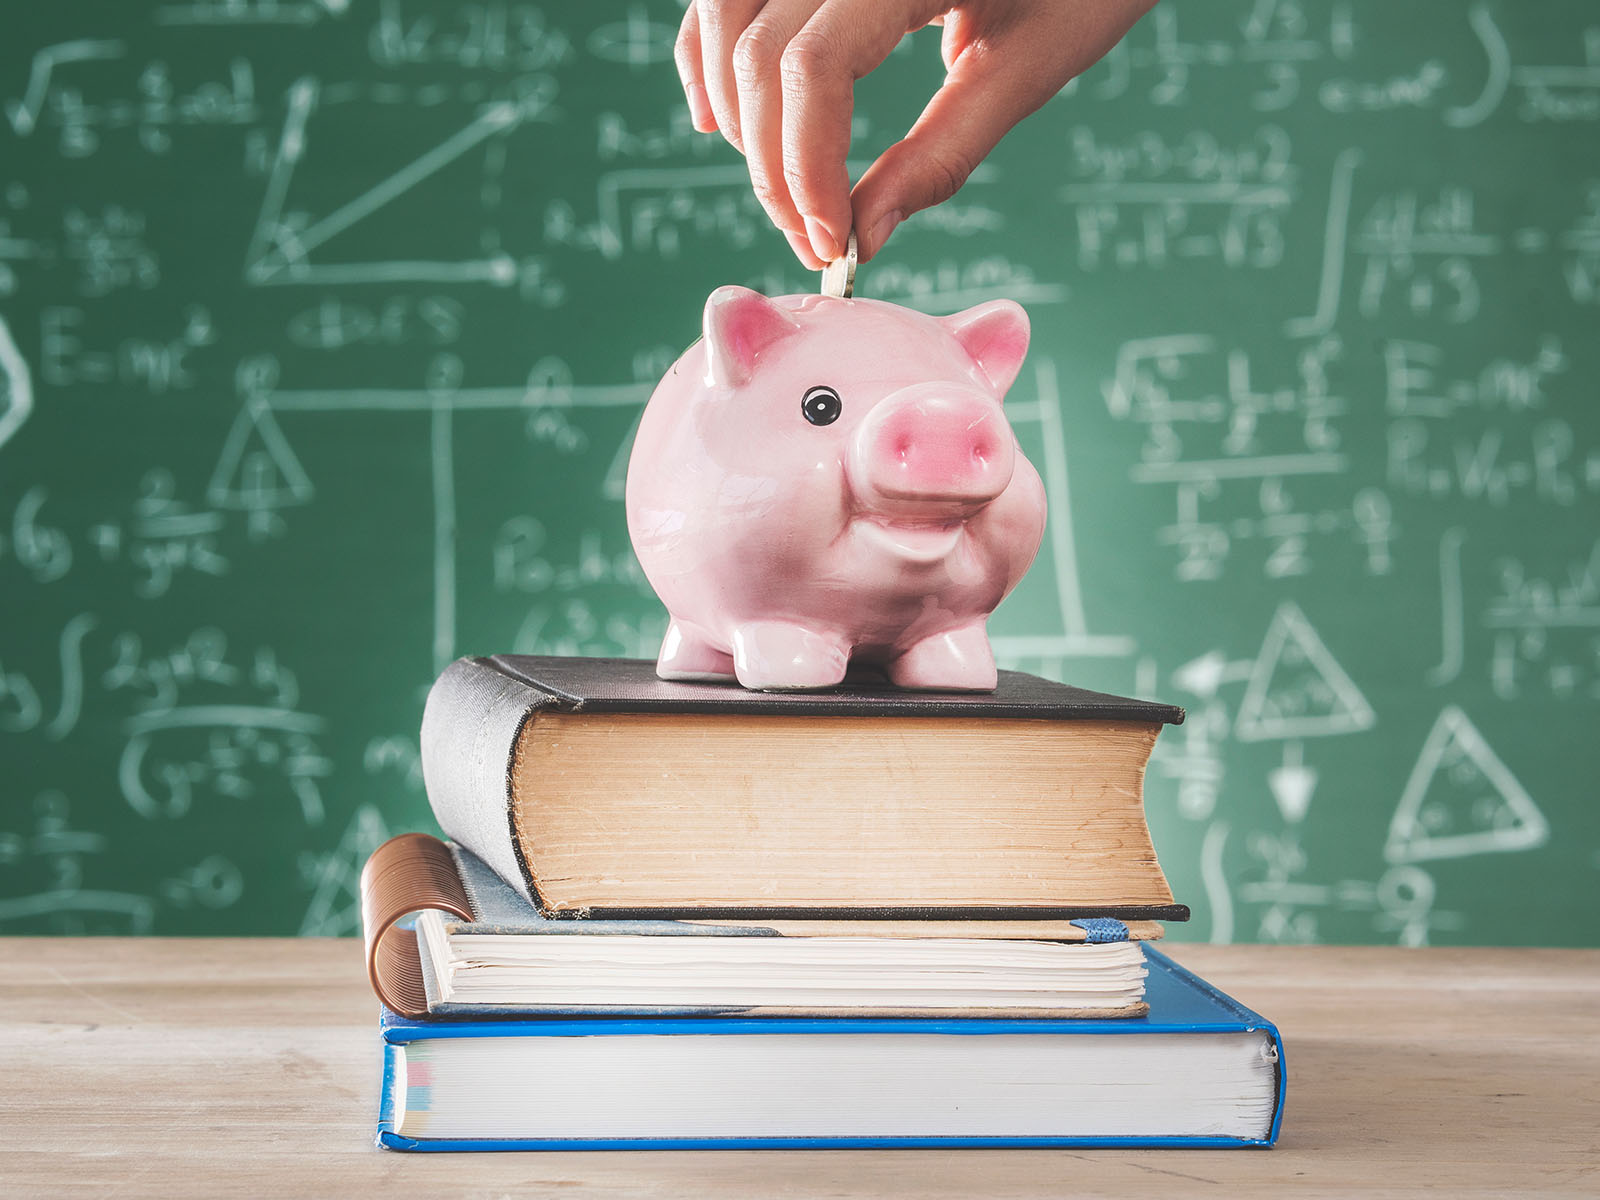 Hand putting coins into a piggy bank on top of textbooks